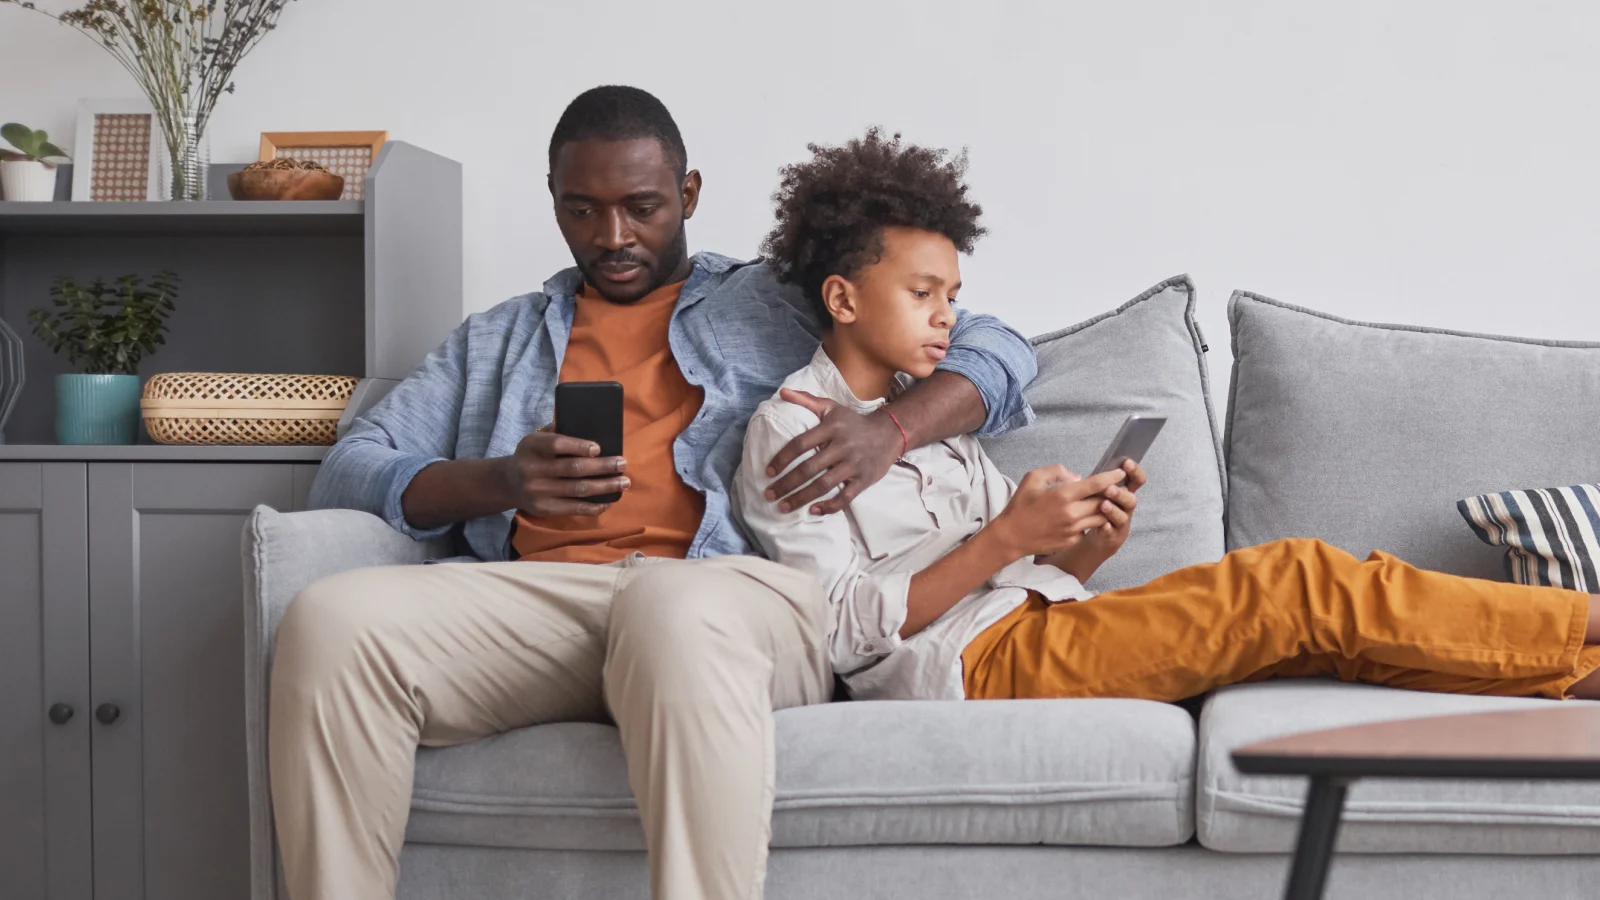 A single view of the whole family's care plans - father and son on couch looking at their own phones